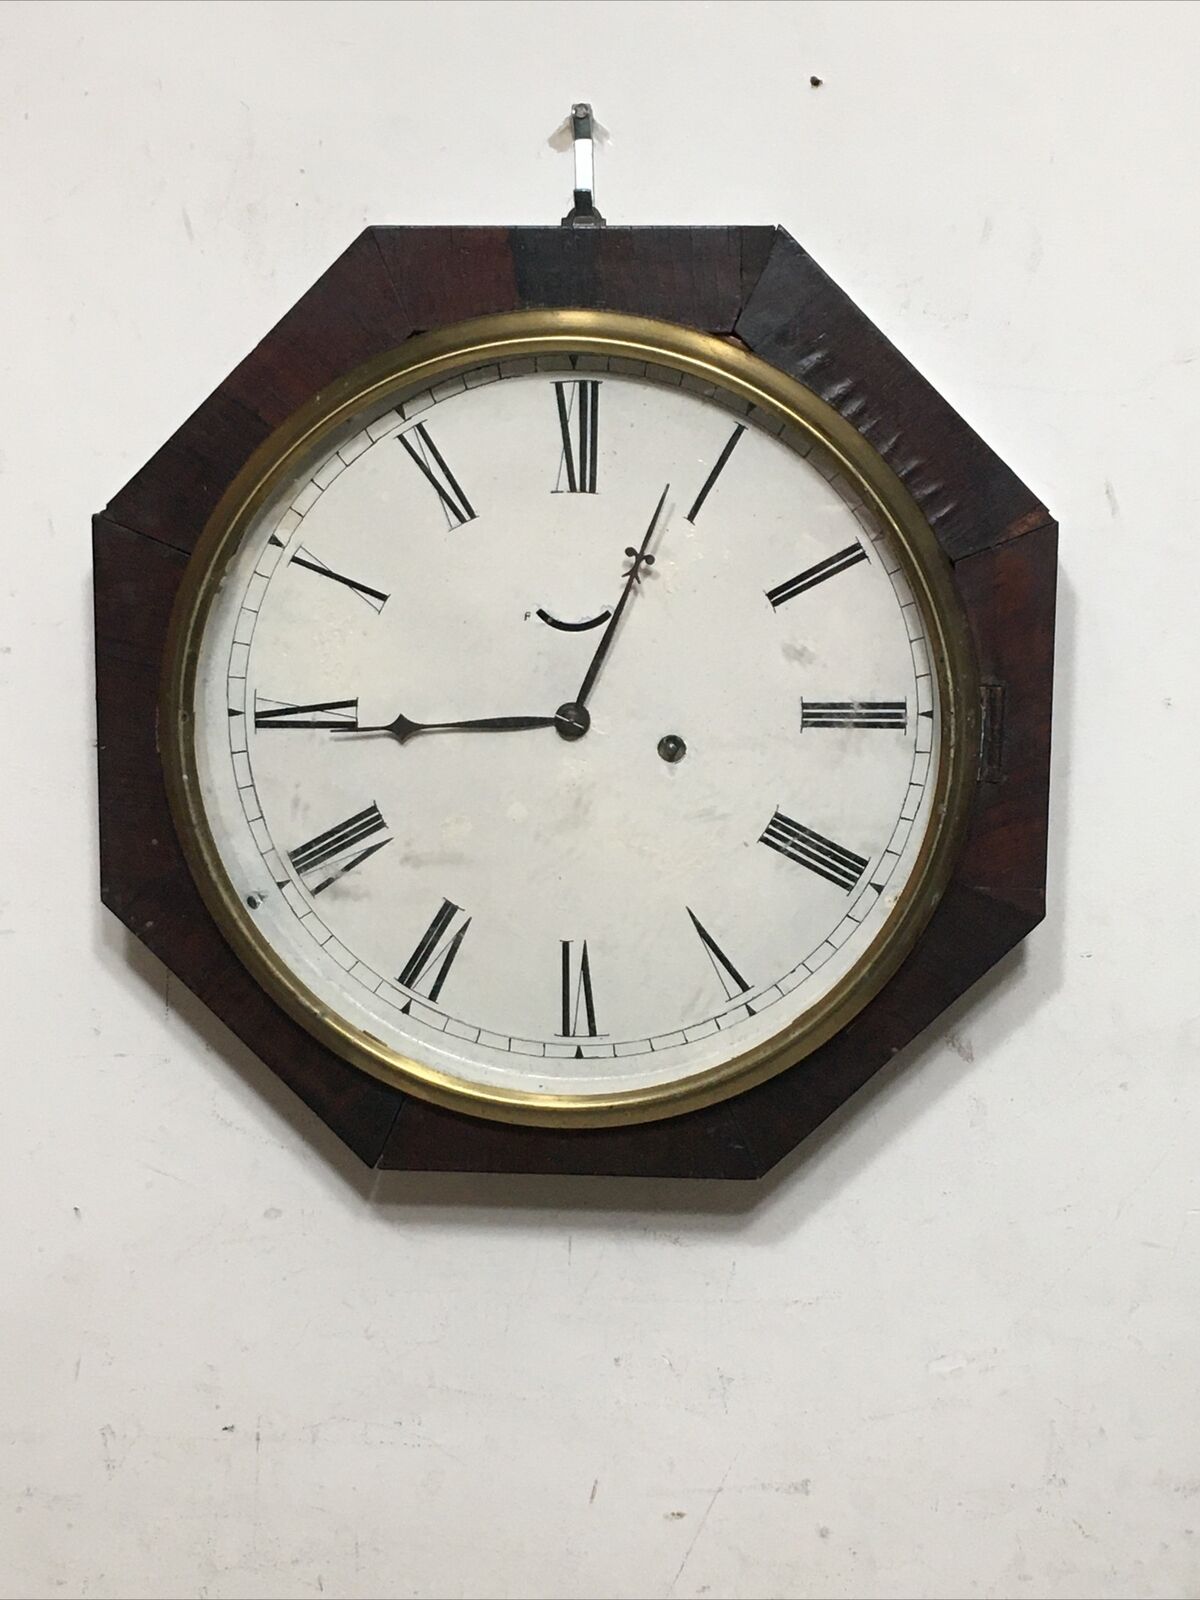 Early Antique Chauncey Jerome Marine Lever Octagon Wall Clock